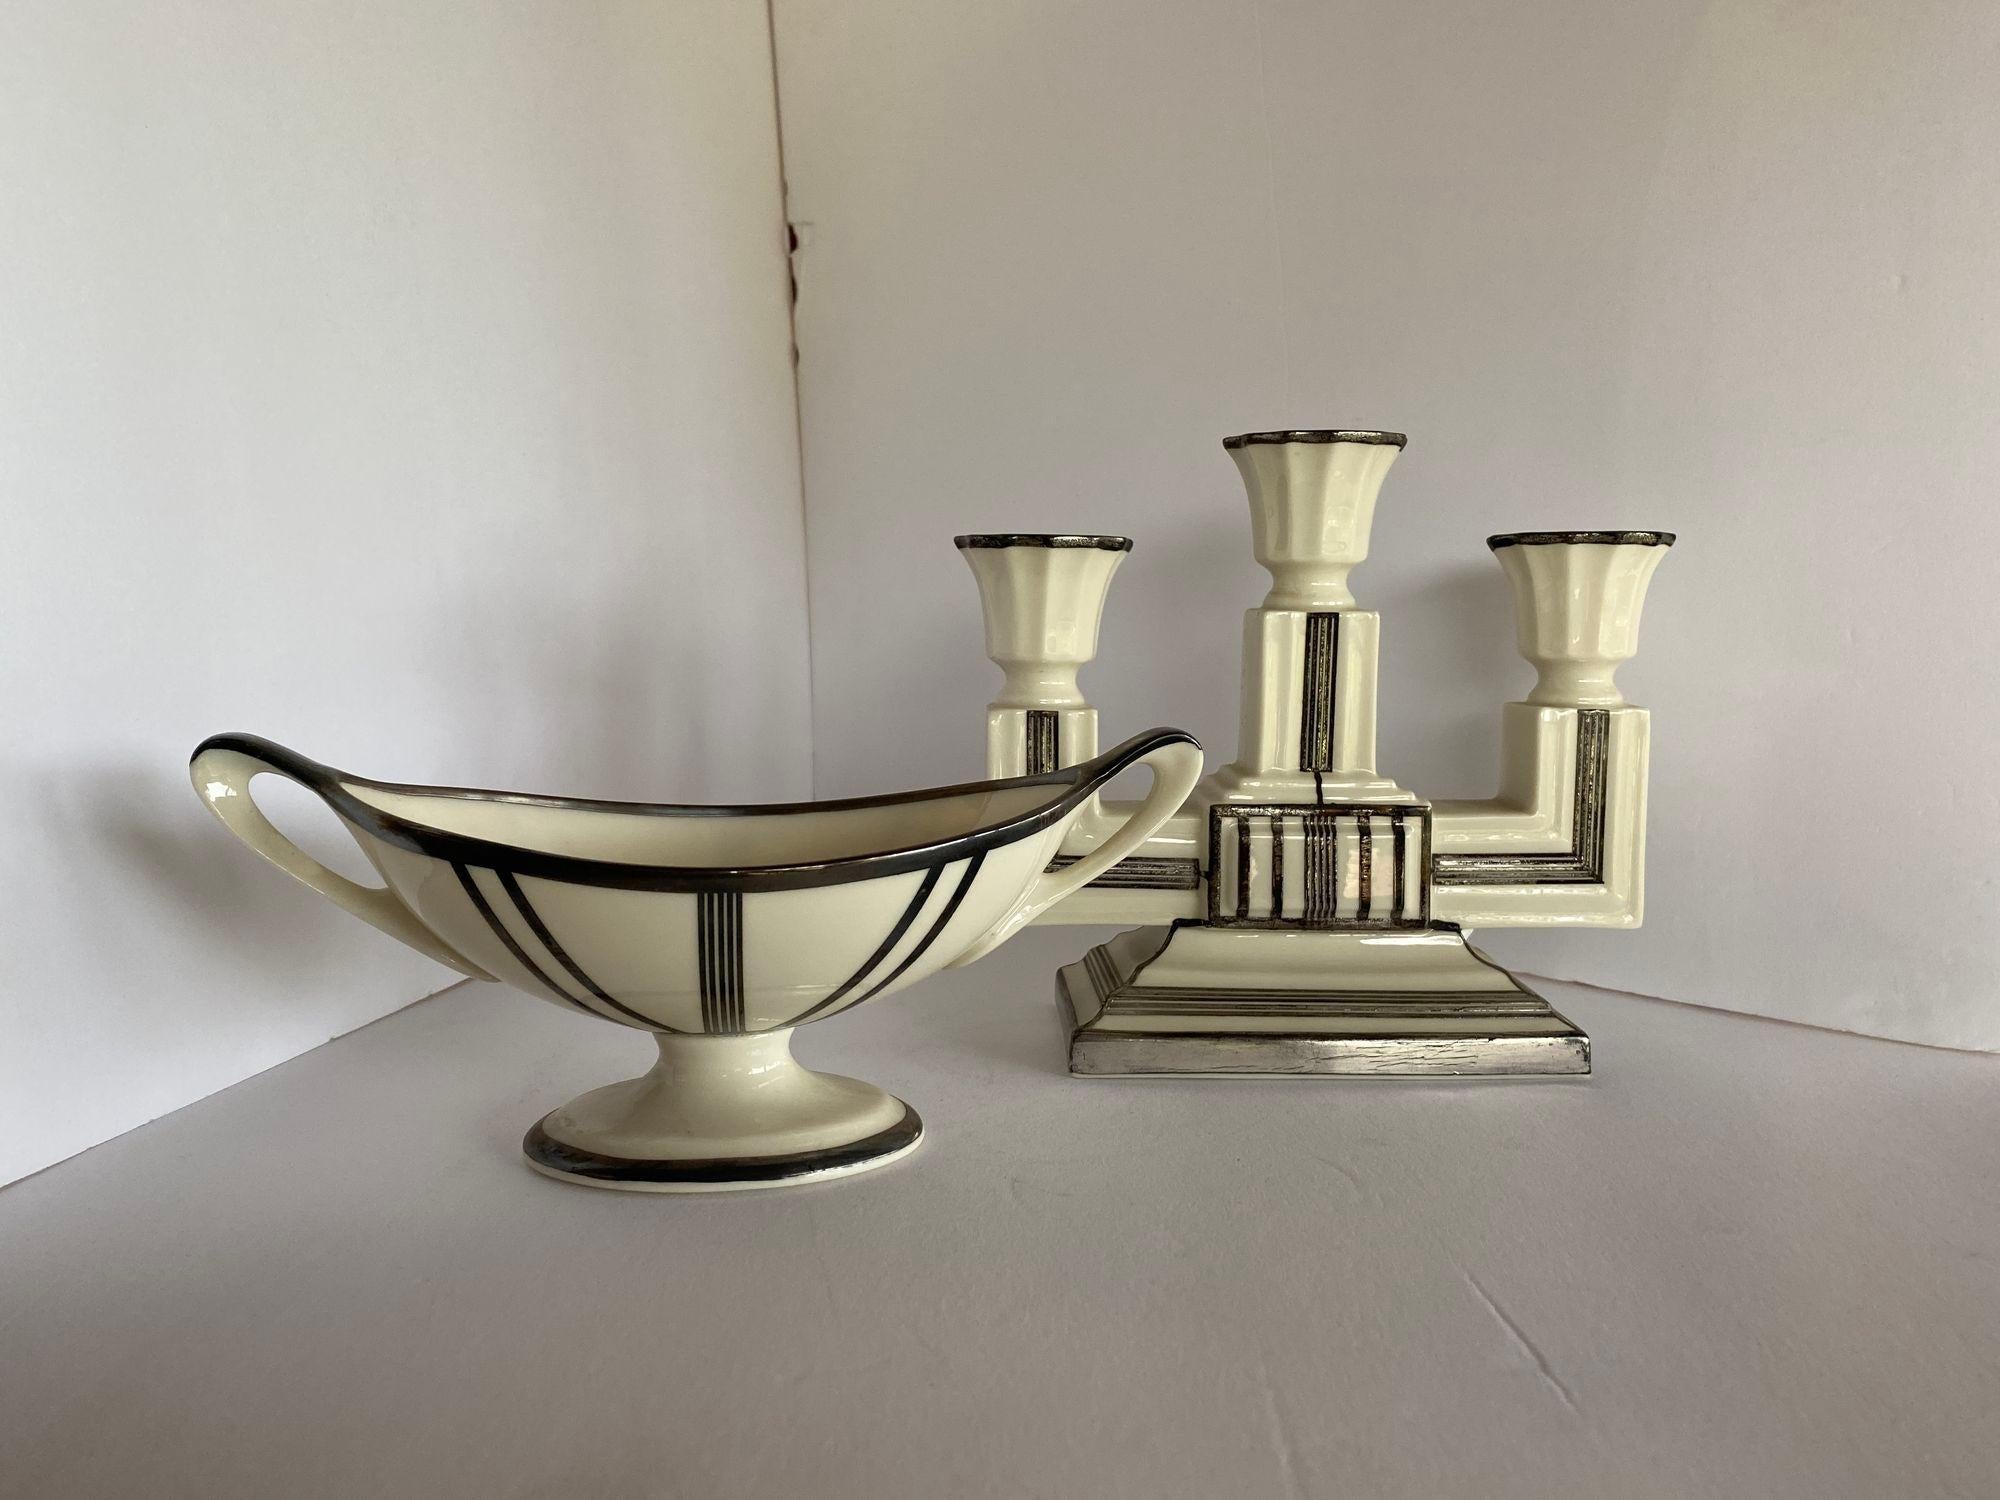 Stepped Art Deco ceramic candelabra and matching sugar bowl with sterling silver overlay by Lenox.

Candle opera: height: 6.5 in. width: 7.5 in. depth: 3 in.
Sugar bowl: height: 3.5 in. width: 8.5 in. depth: 3.5 in.

Circa 1930.